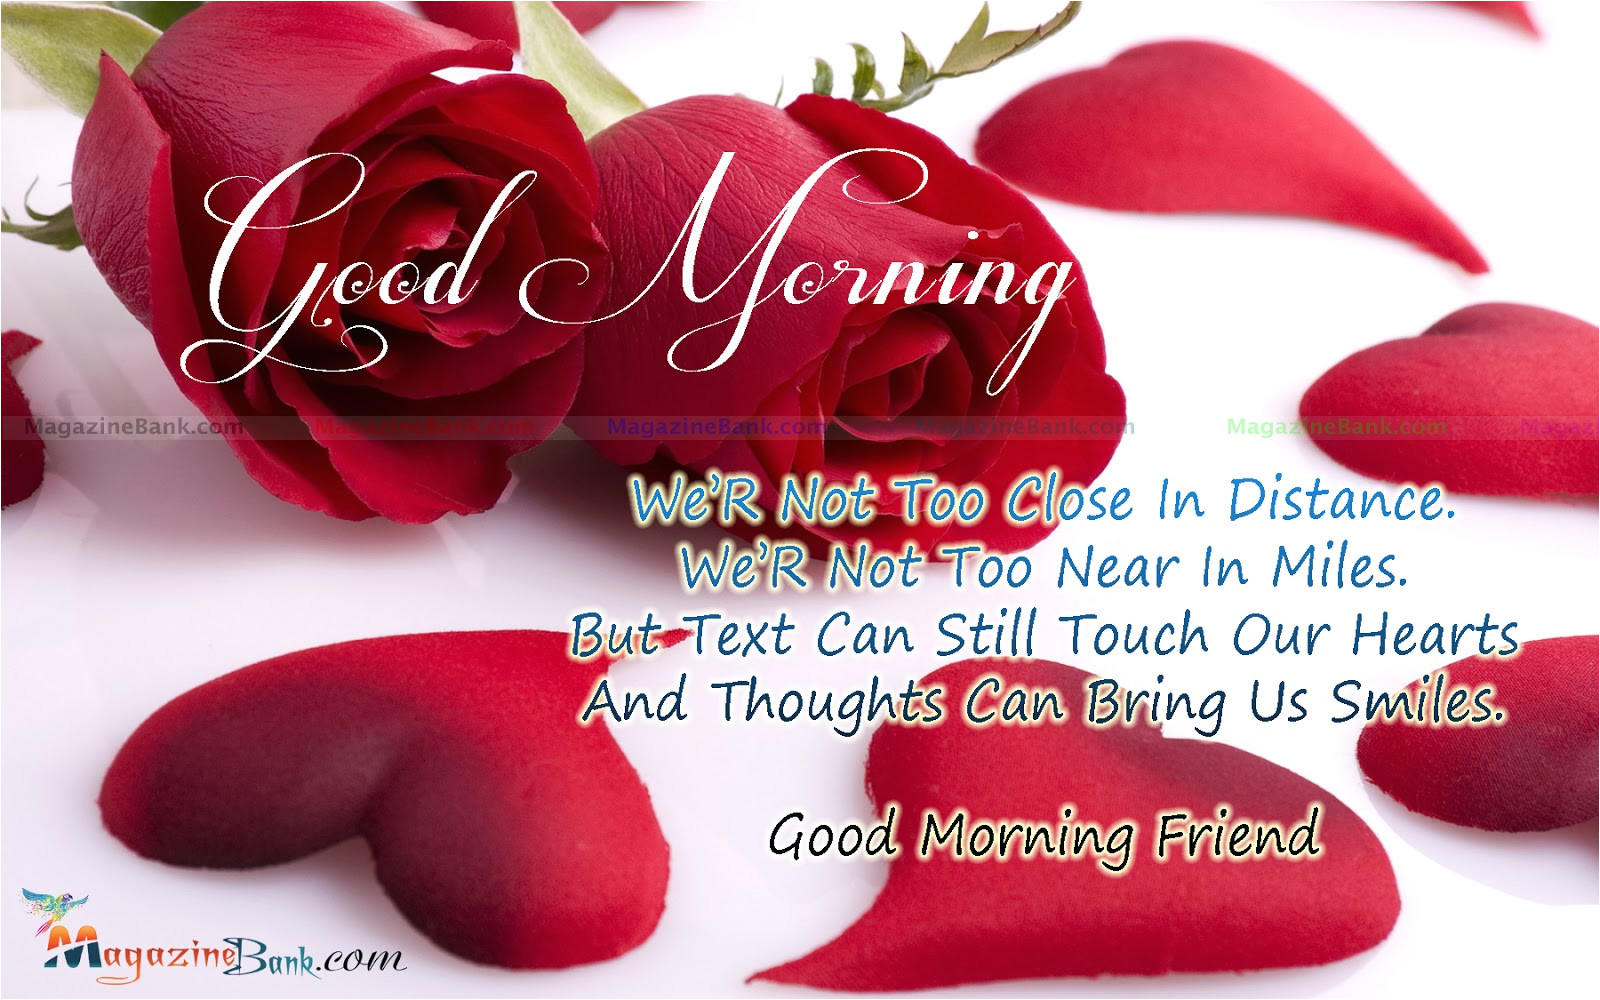 47571736 good morning sms for friend quotes 3 jpg